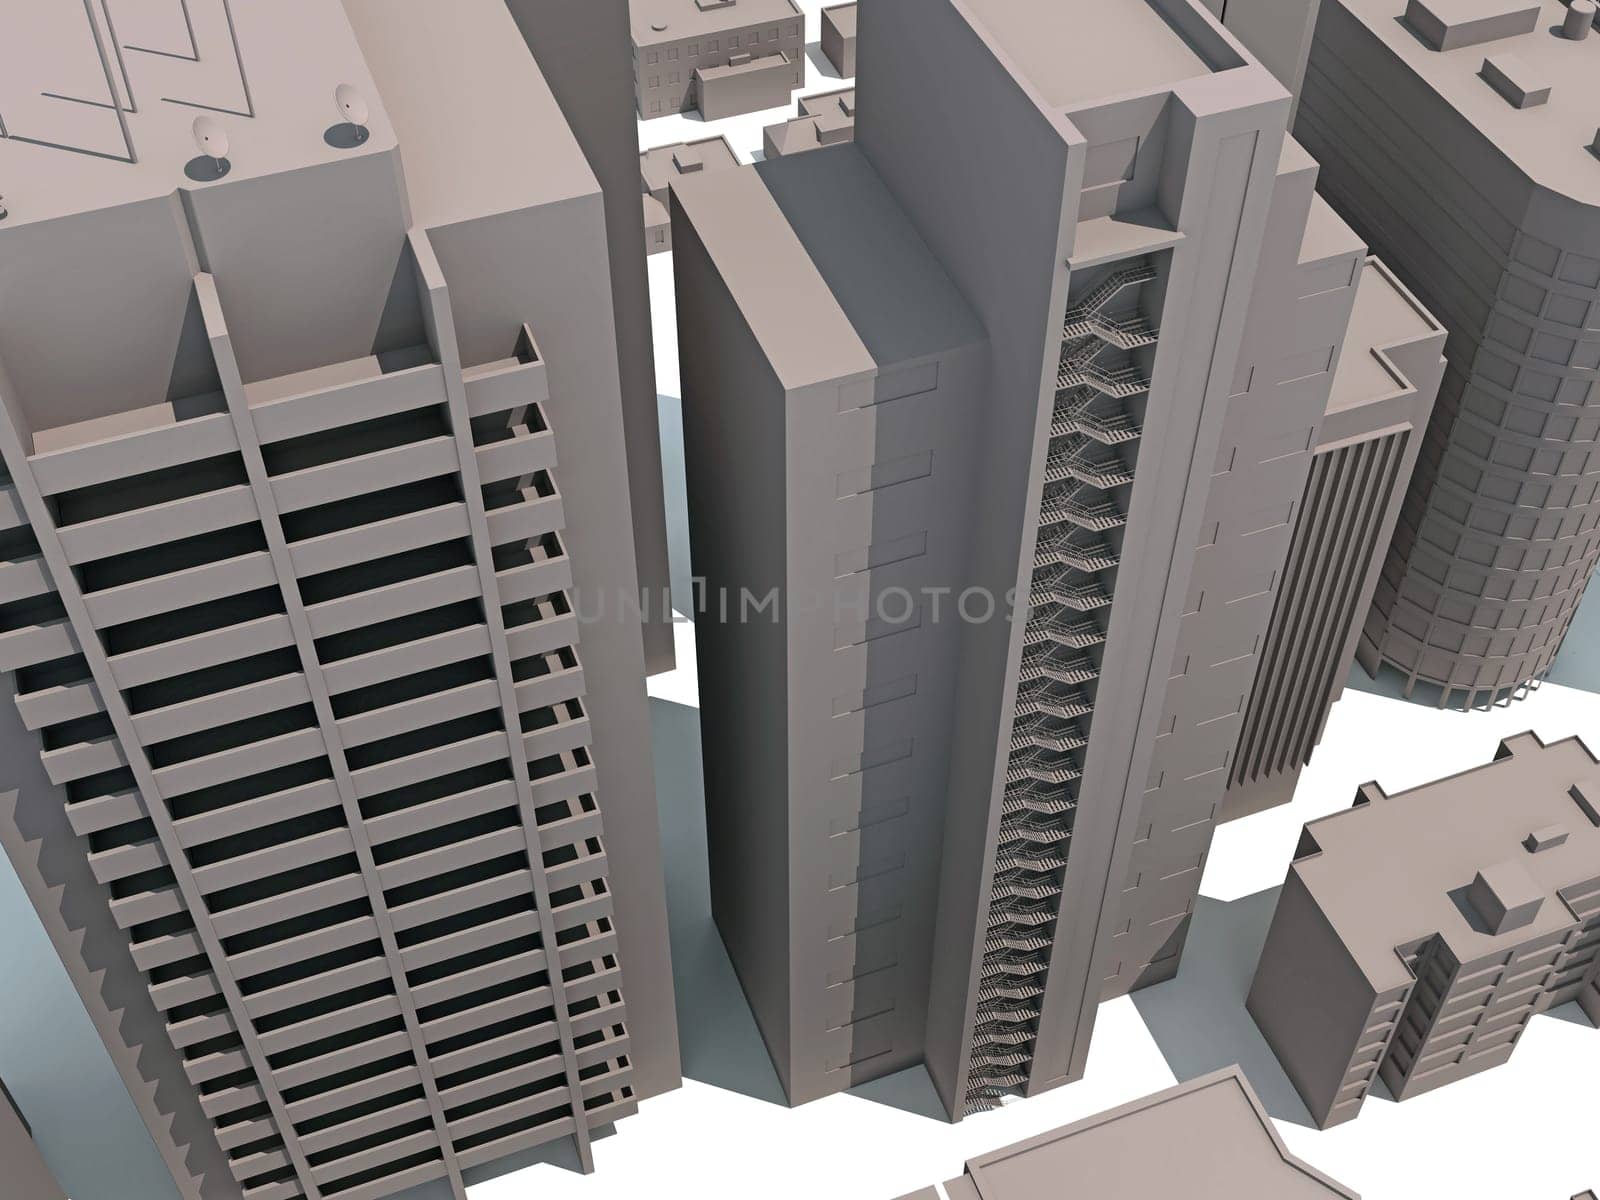 City Buildings 3D rendering on white background by 3DHorse